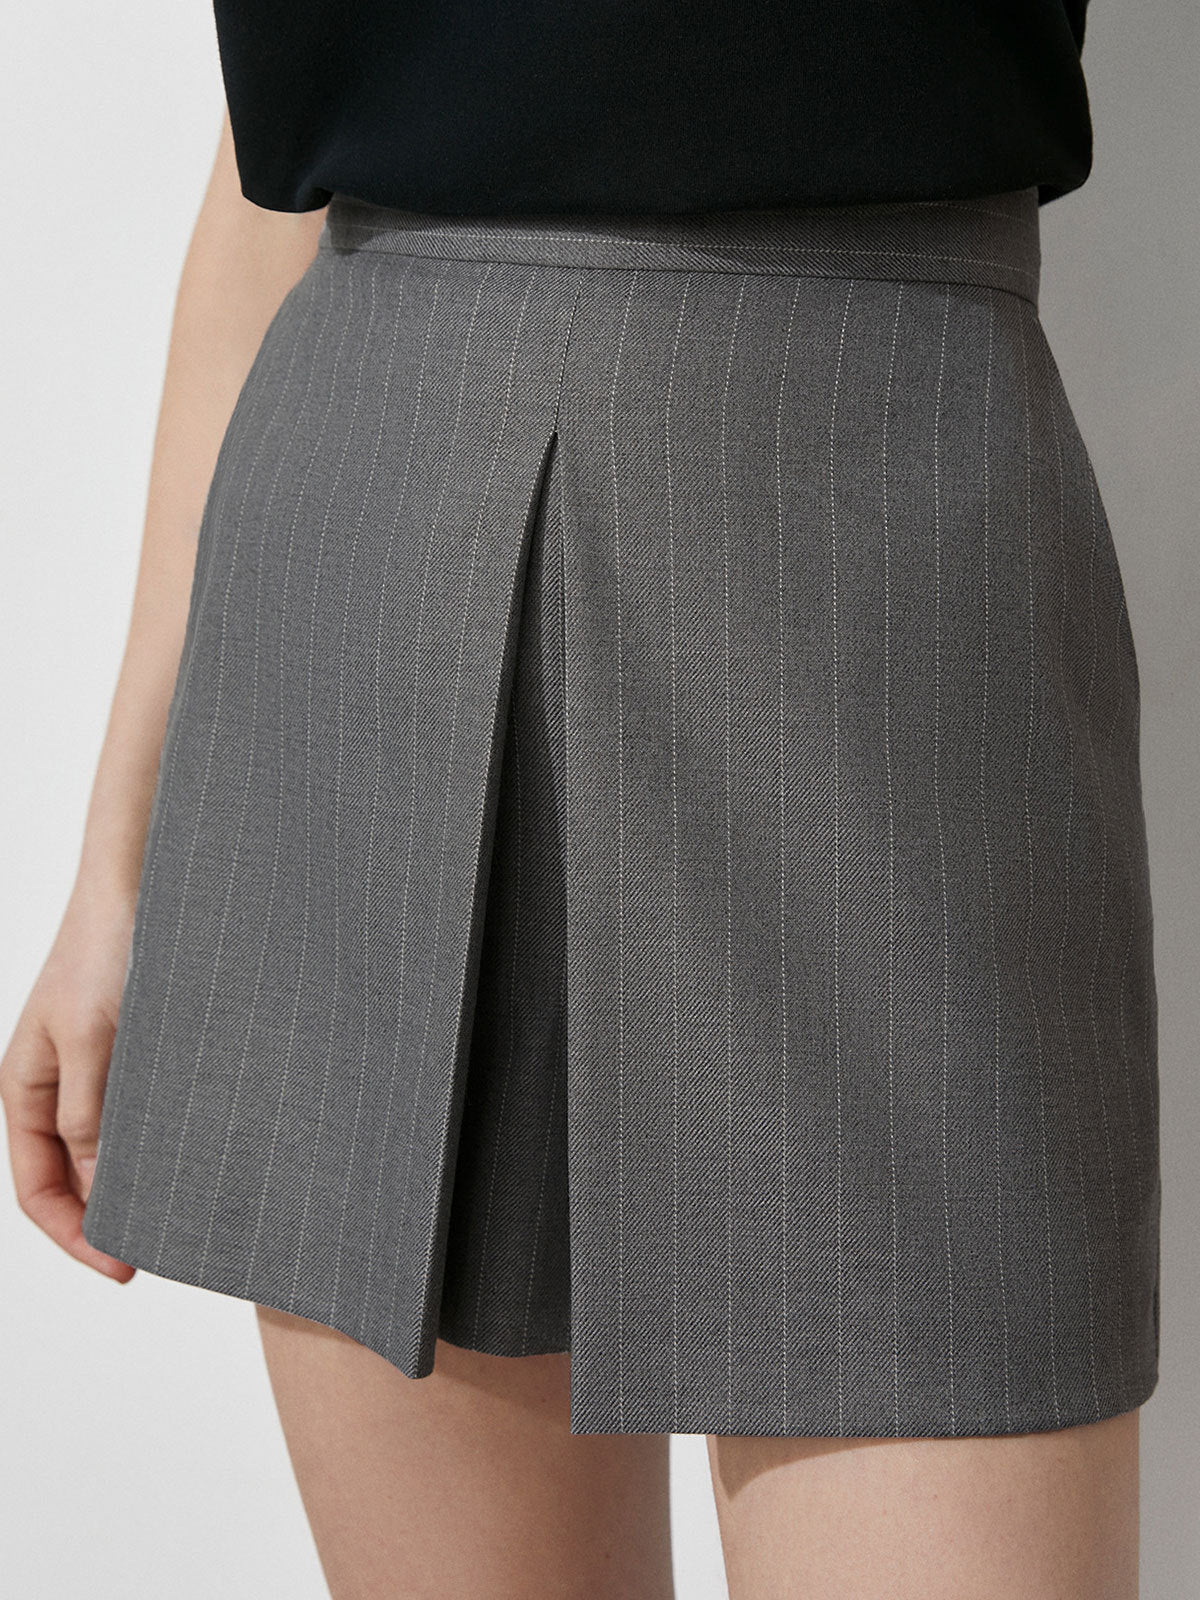 Striped Spring Loose Commuter Culottes Two-piece Suits